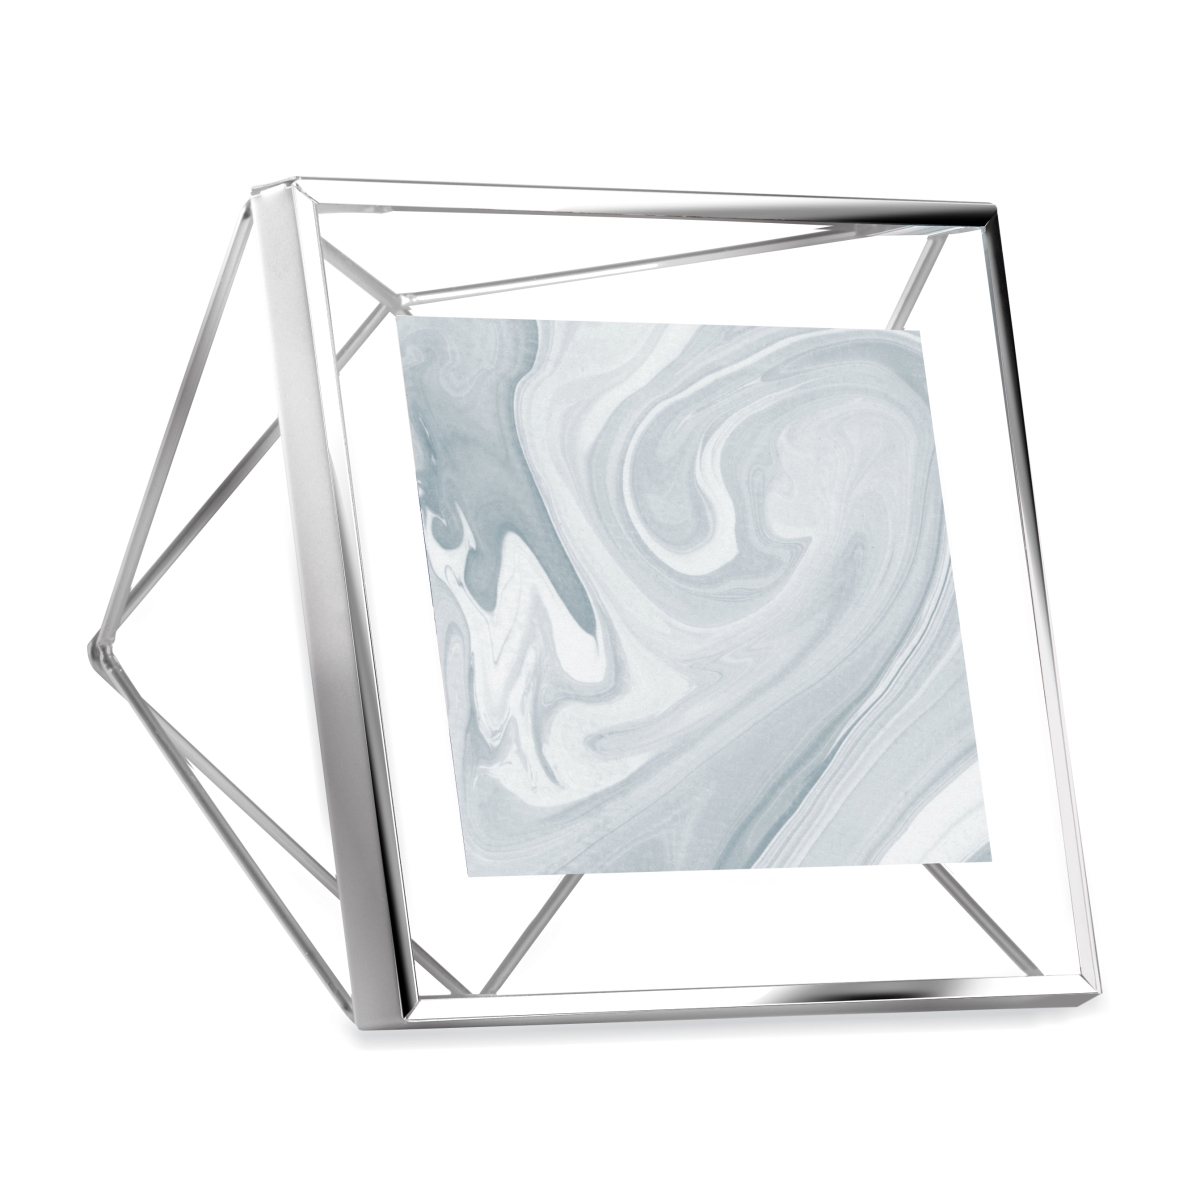 313017-158 4 X 4 In. Prisma Picture Frame Floating Wall Or Desk Photo Display - Chrome